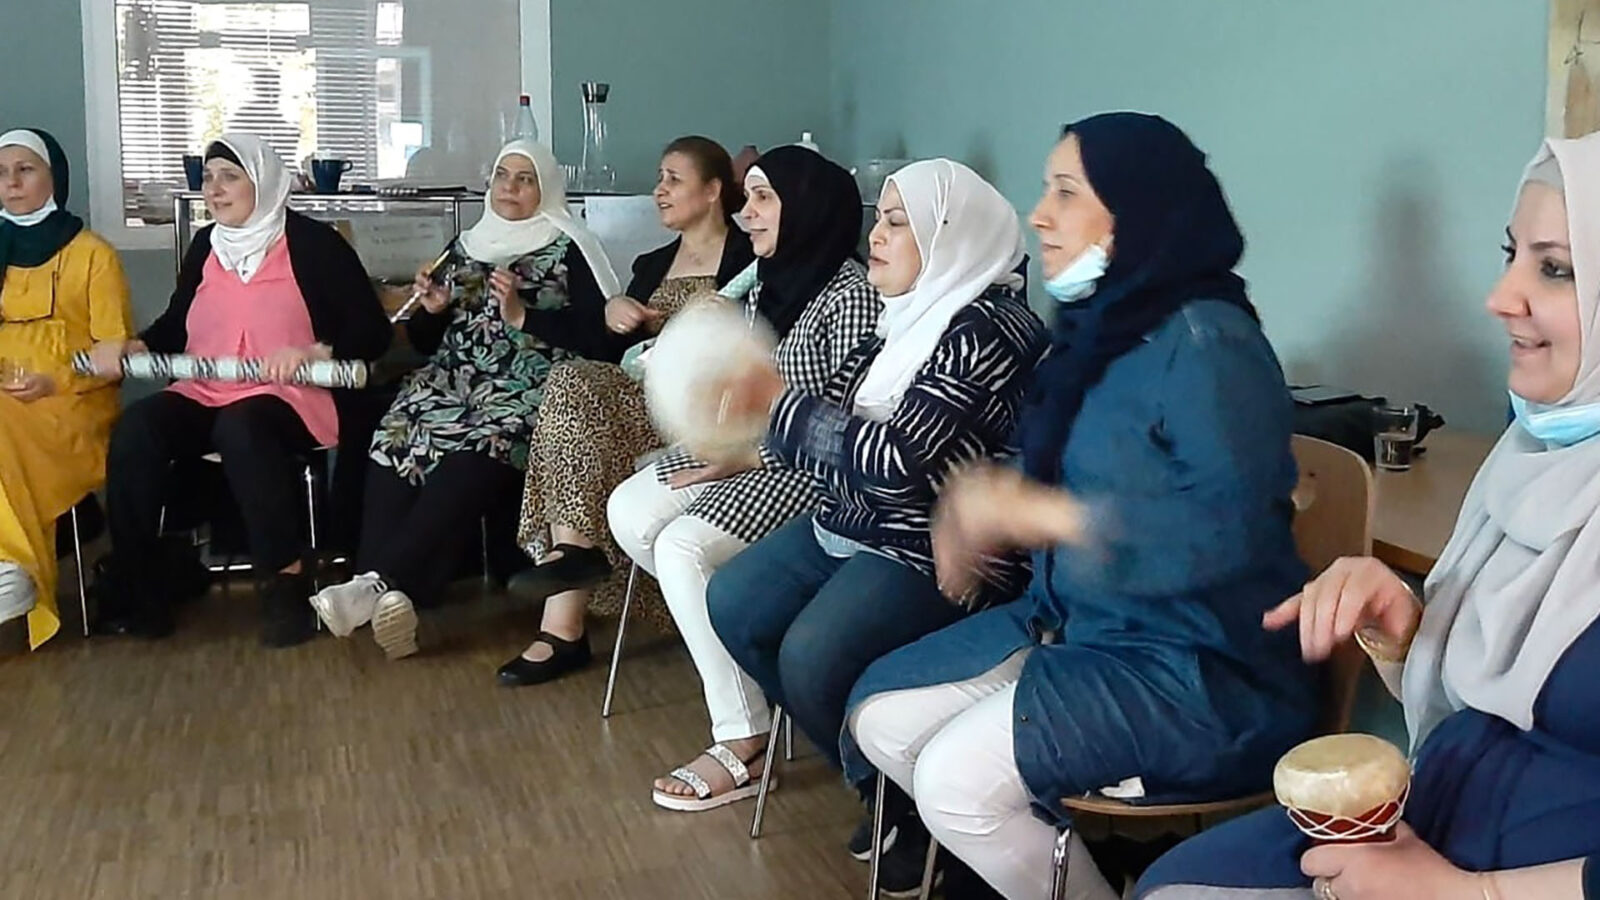 The Al Karama women's group sets their own photo film to music with homemade instruments.